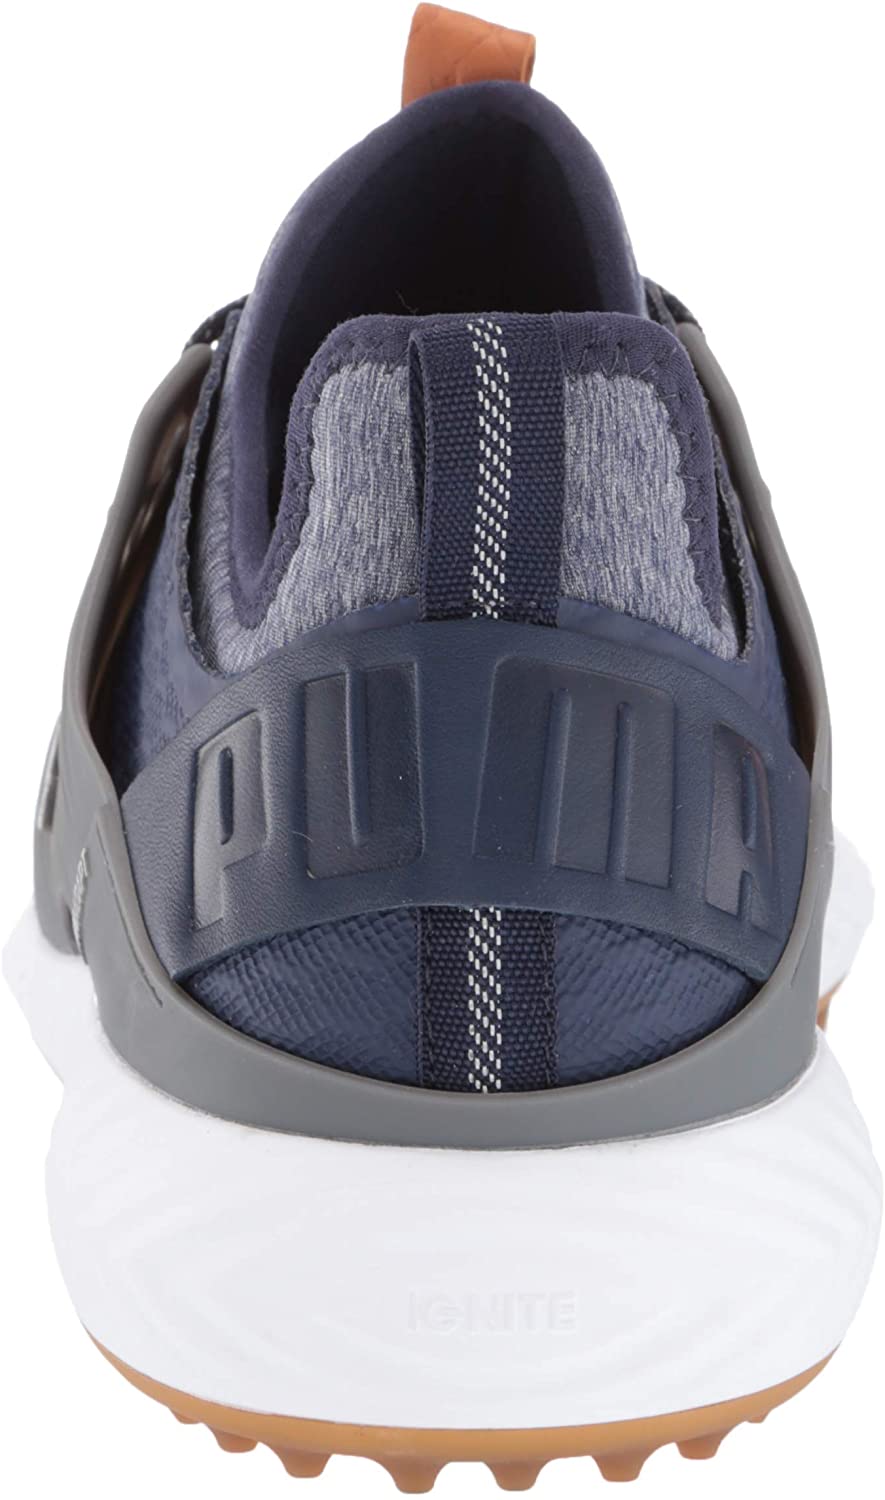 NEW Mens Puma Ignite PWRADAPT Caged Golf Shoes Peacoat / Silver / Shade 11 M - image 3 of 7